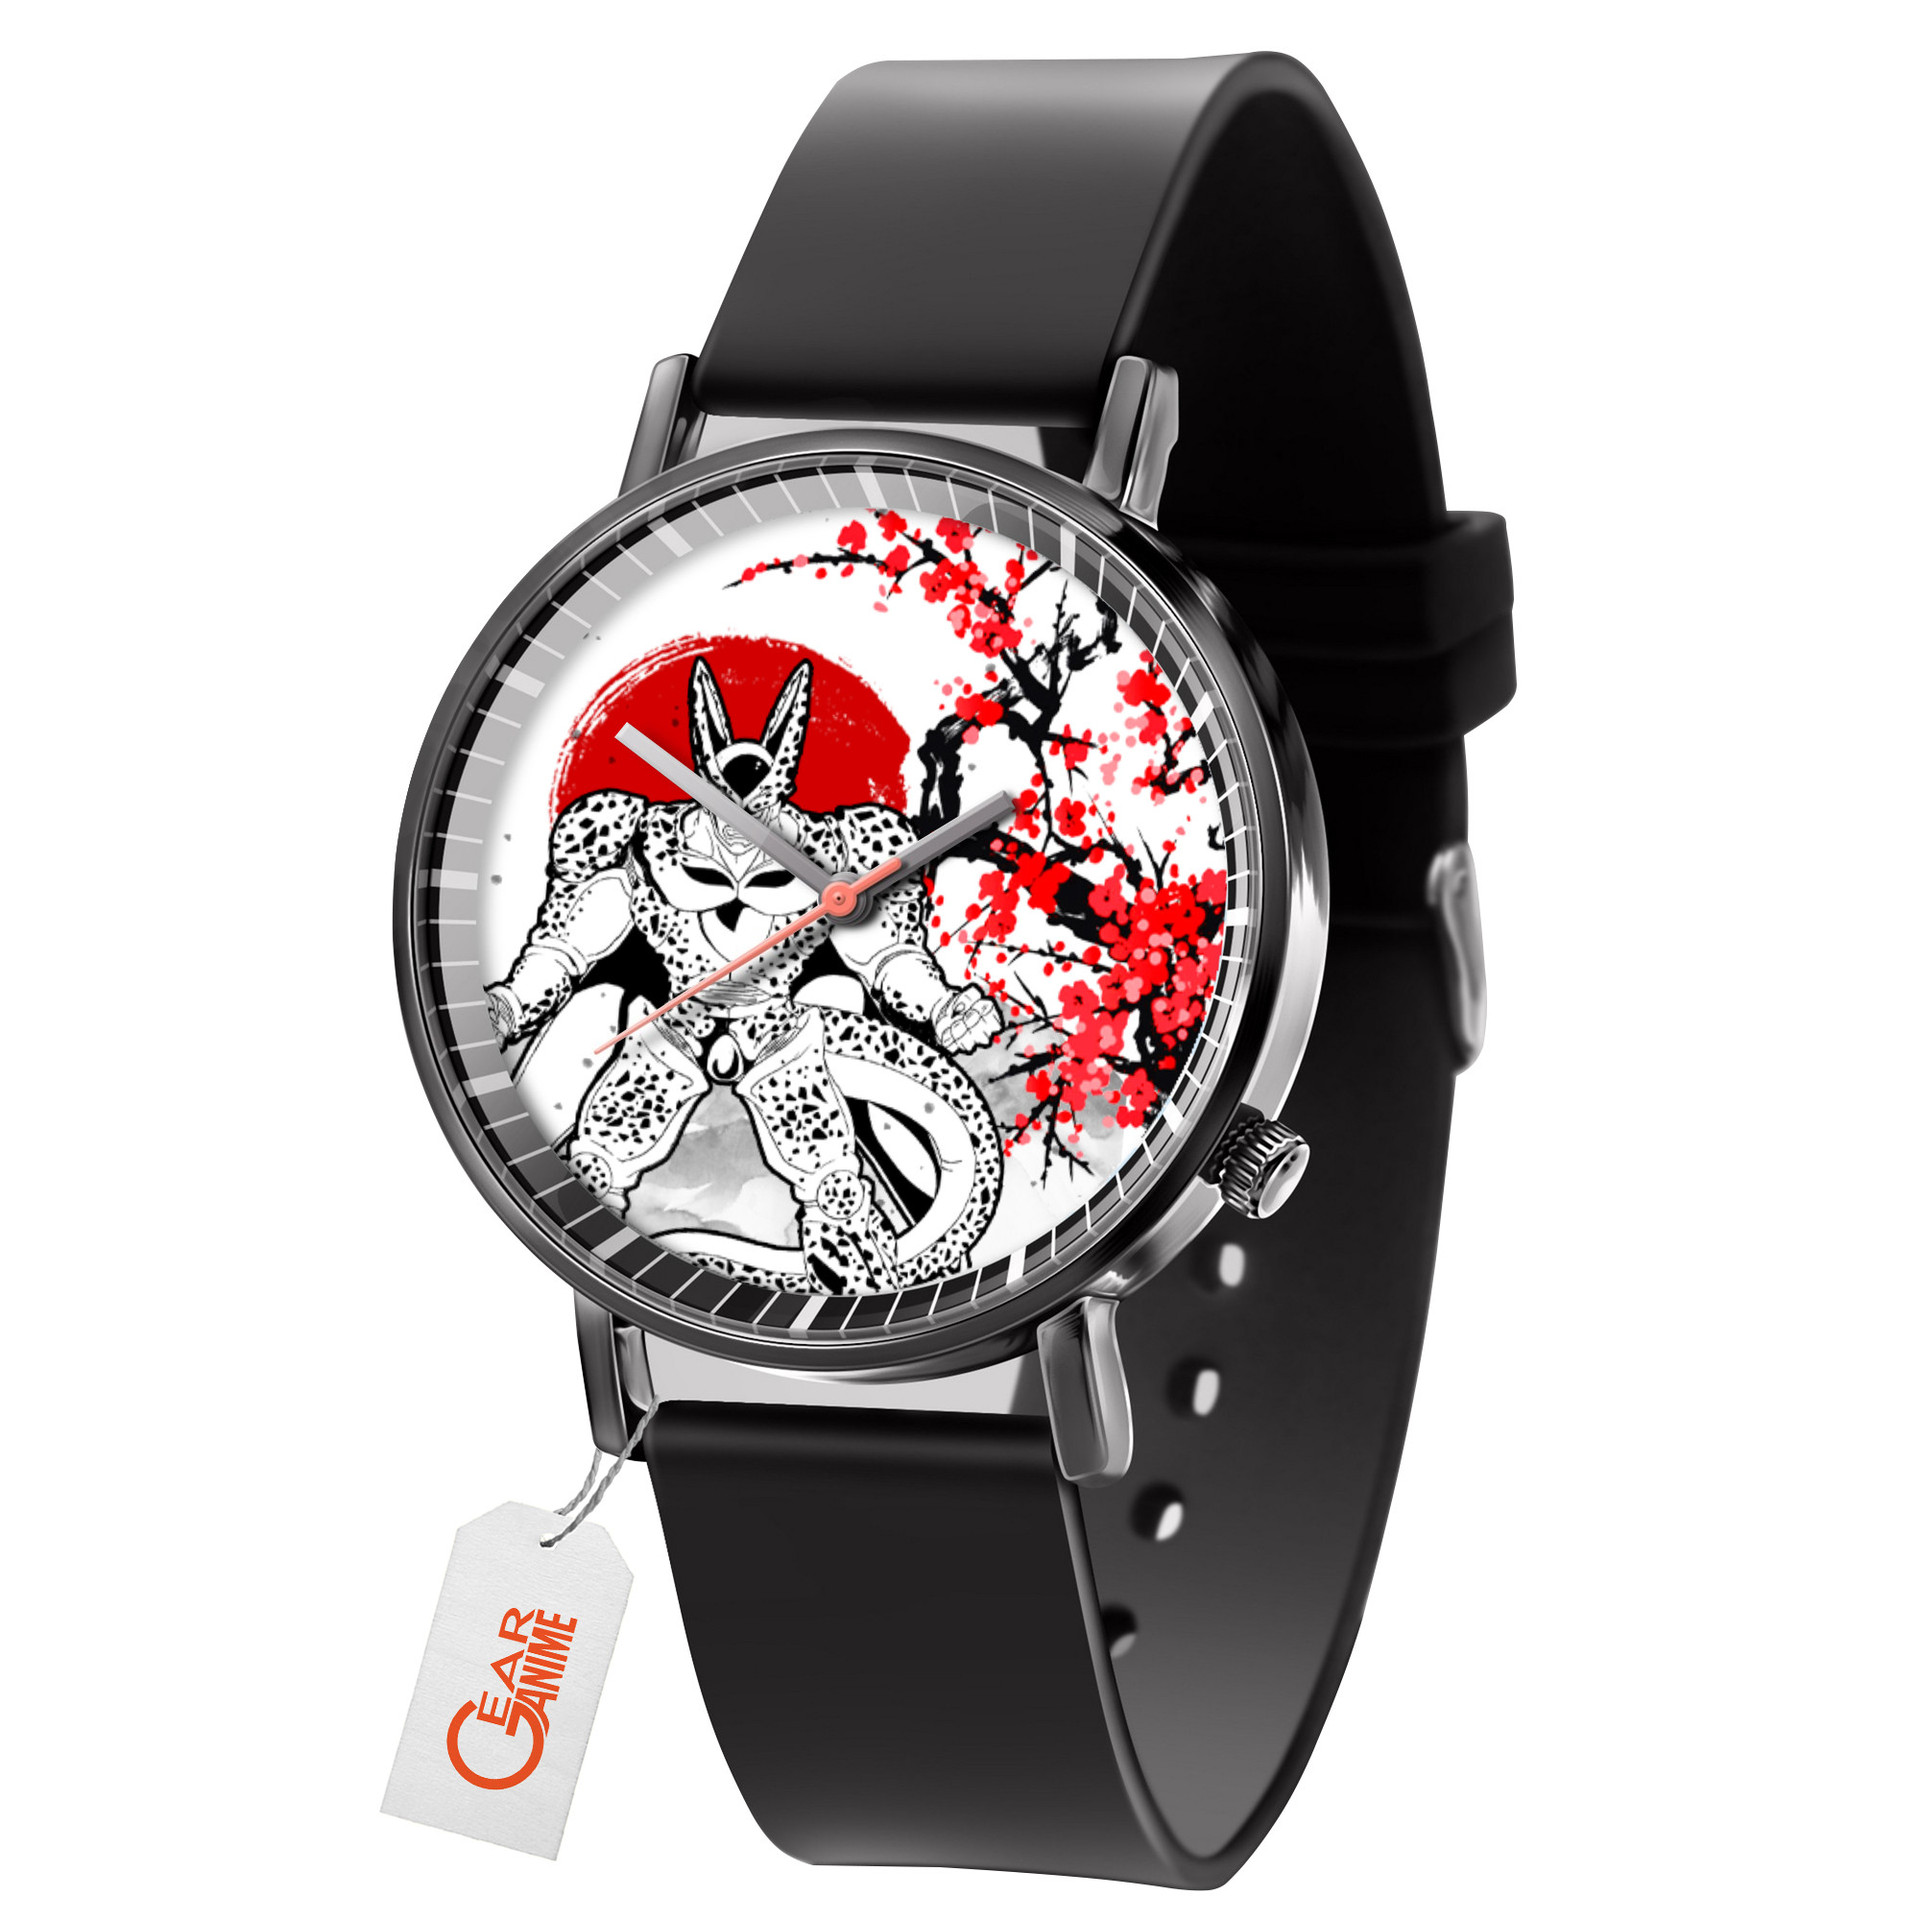 Cell Max Leather Band Wrist Watch Japan Cherry Blossom-Gear Anime